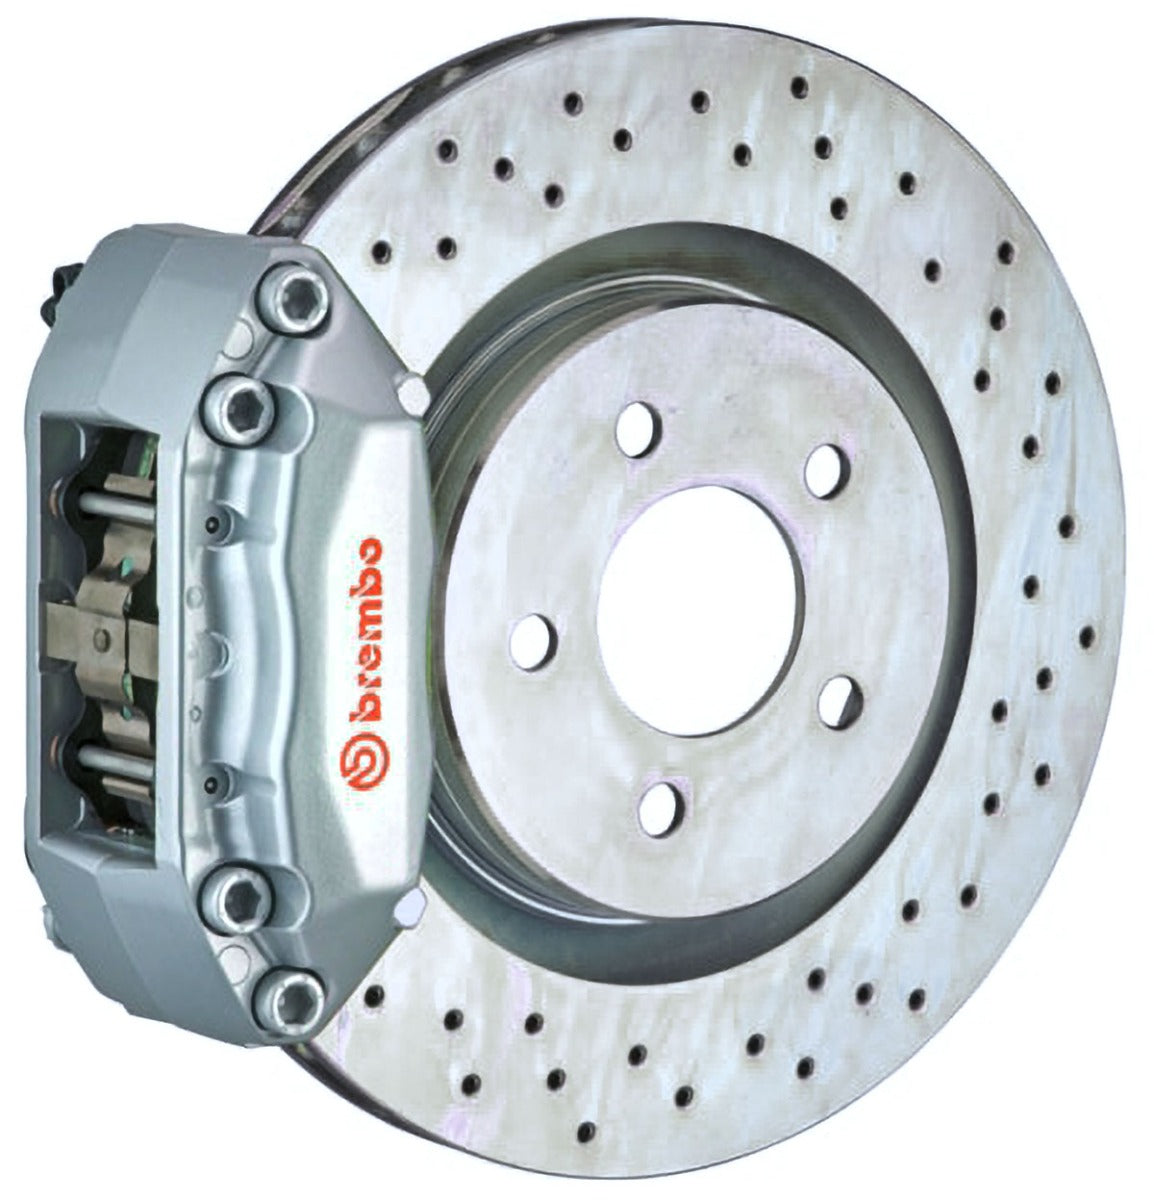 Brembo Brakes Front 330x28 One Piece Rotors + Four Piston Calipers